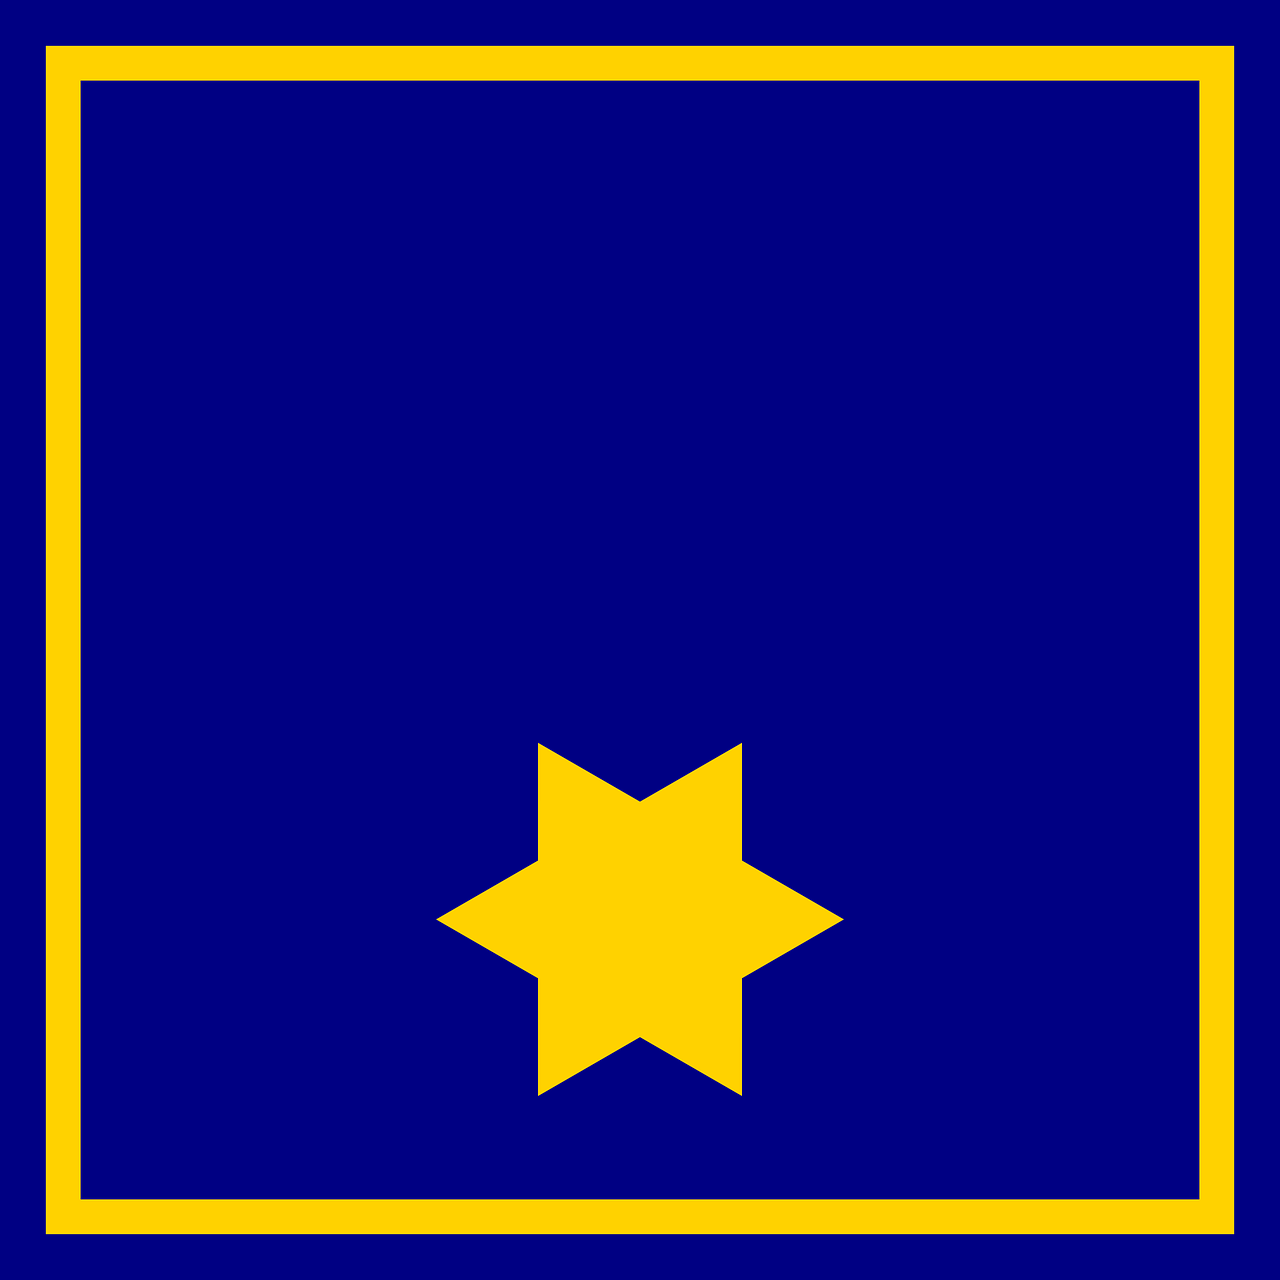 star,flag,blue,border,yellow,free vector graphics,free pictures, free photos, free images, royalty free, free illustrations, public domain